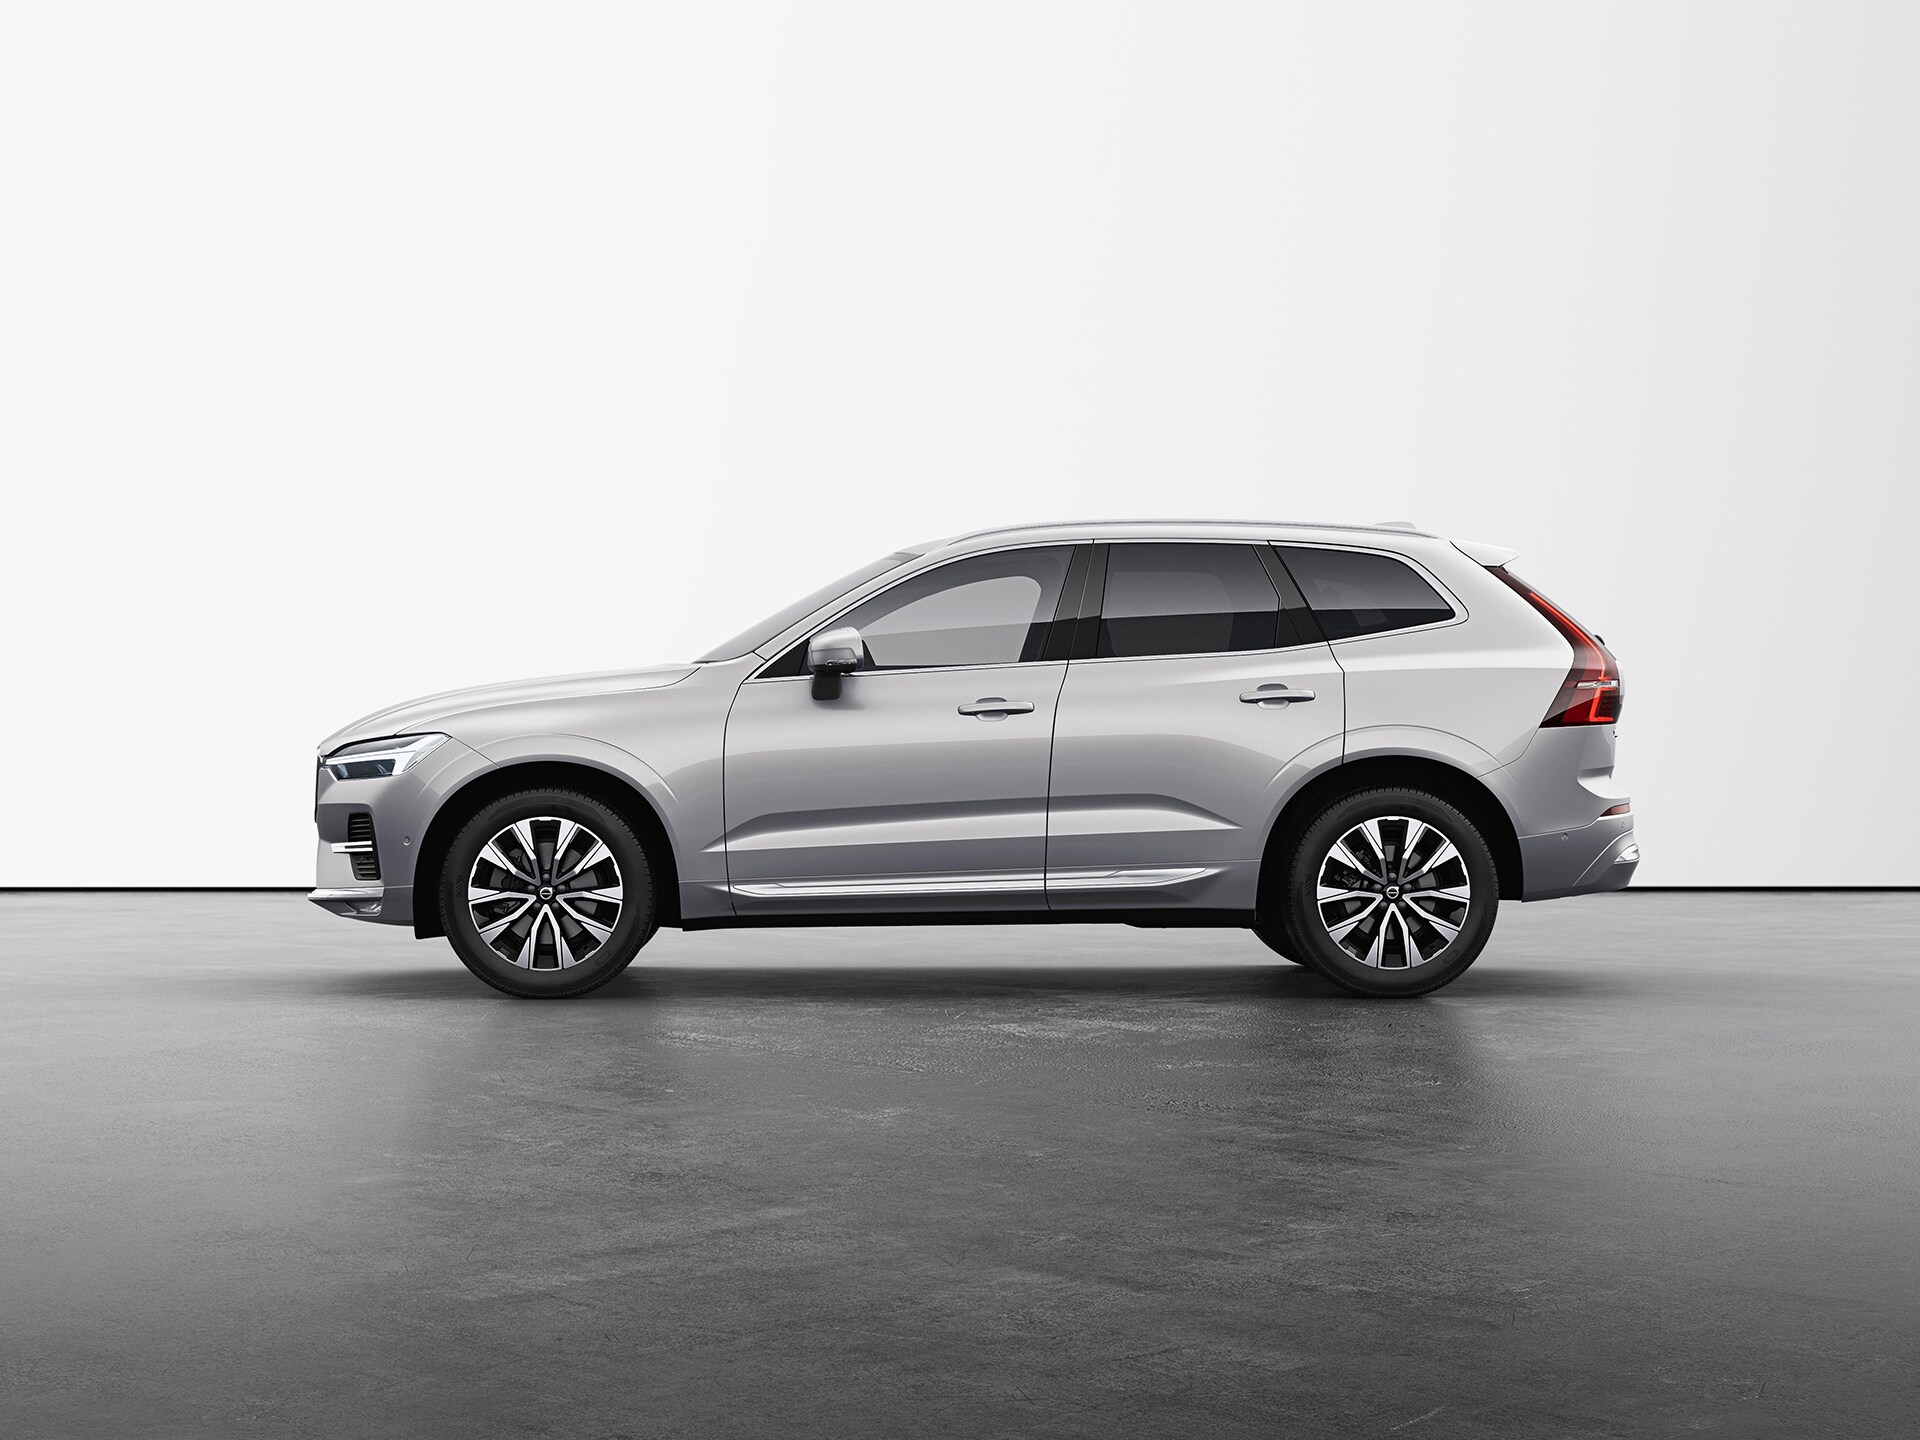 A silver Volvo XC60 compact SUV standing still on grey floor in a studio